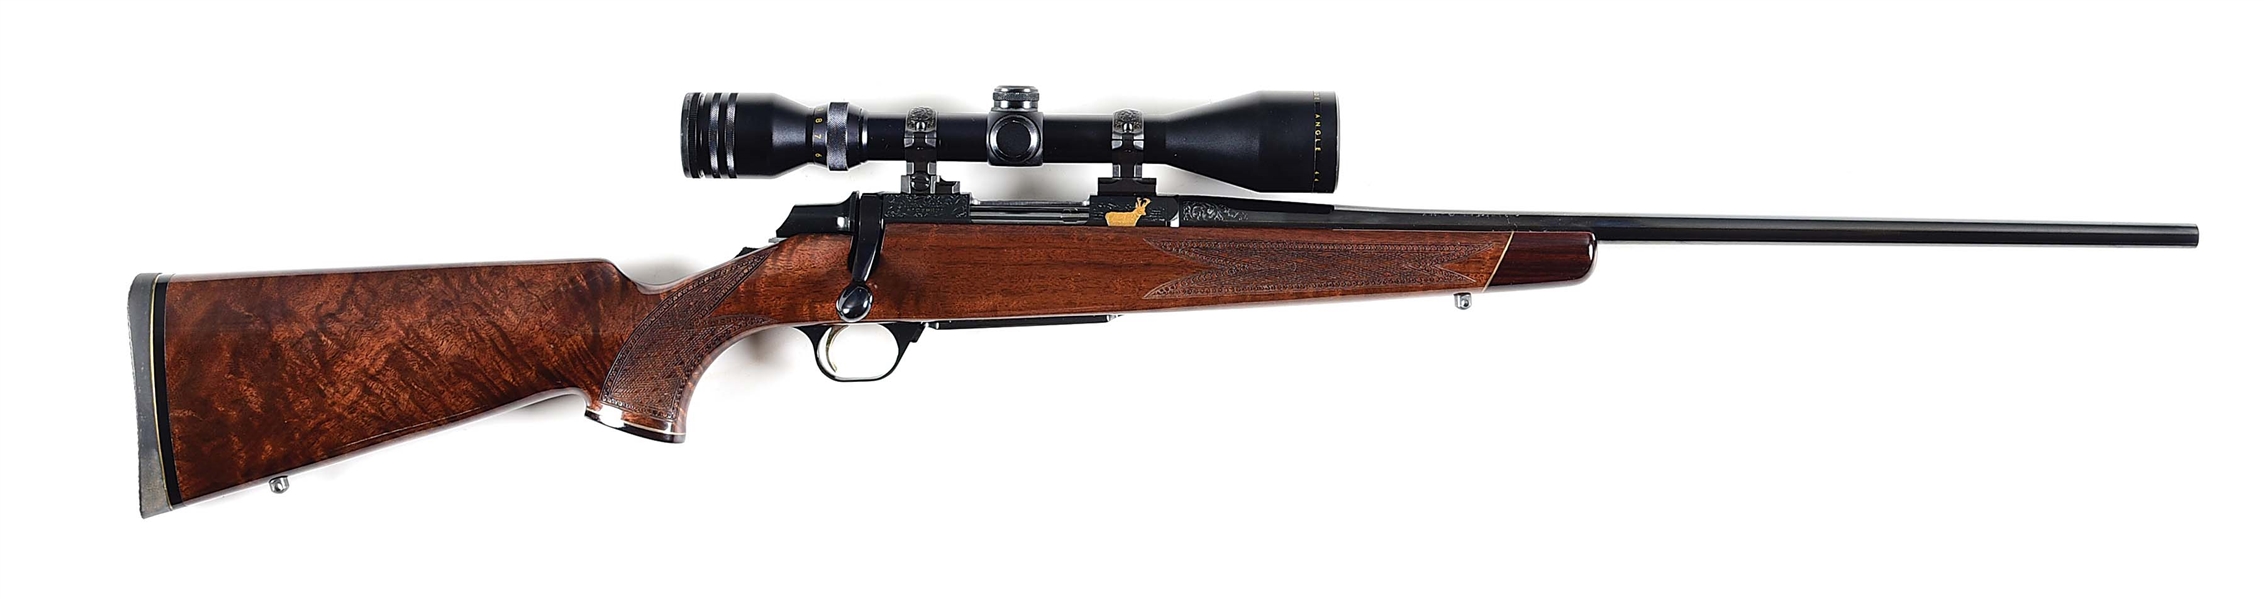 (M) BROWNING A-BOLT PRONGHORN FACTORY ENGRAVED BOLT ACTION RIFLE 